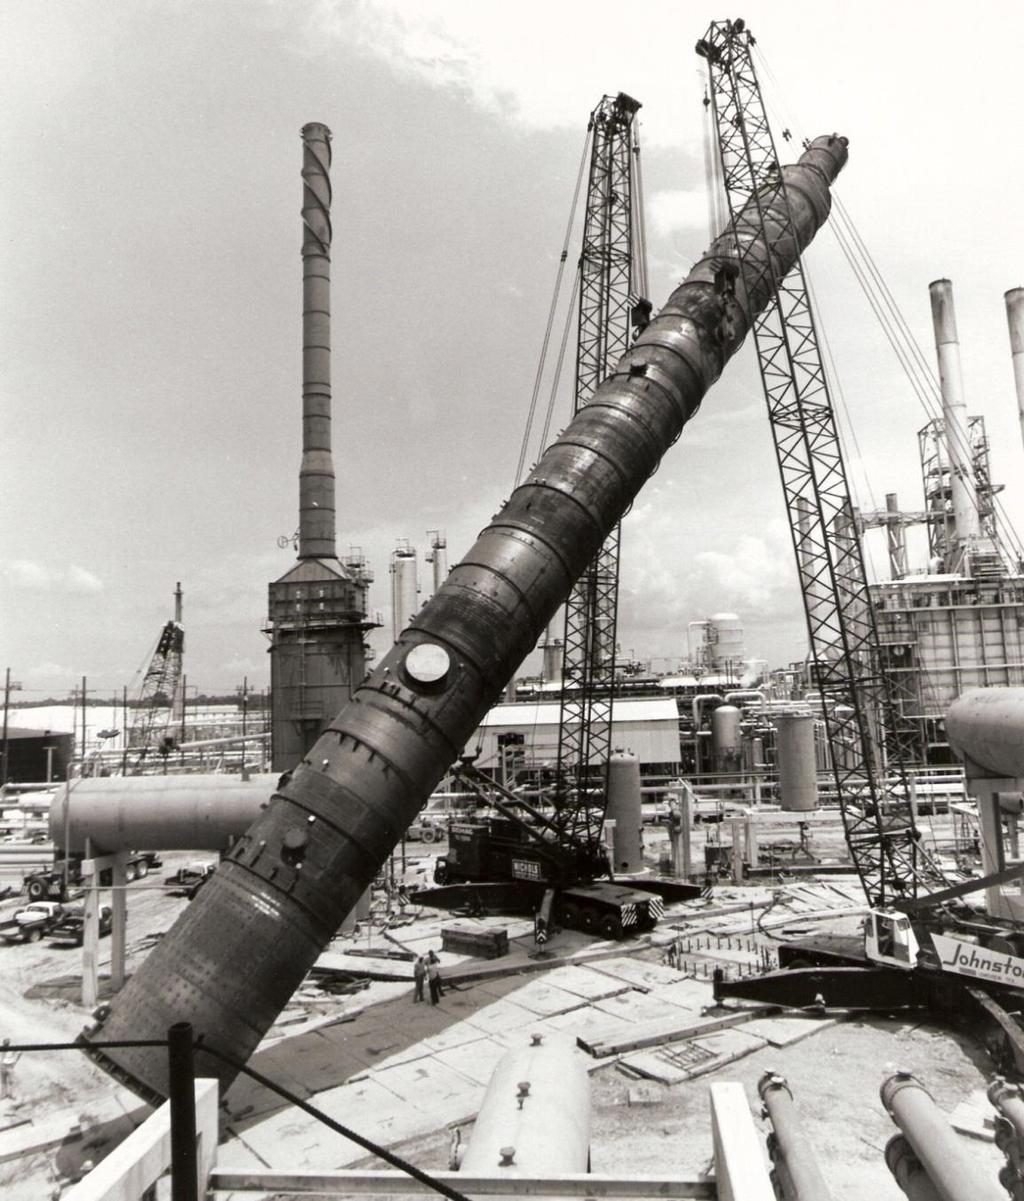 ERECTING A TALL REFINERY COLUMN WITH TWO MATCHED